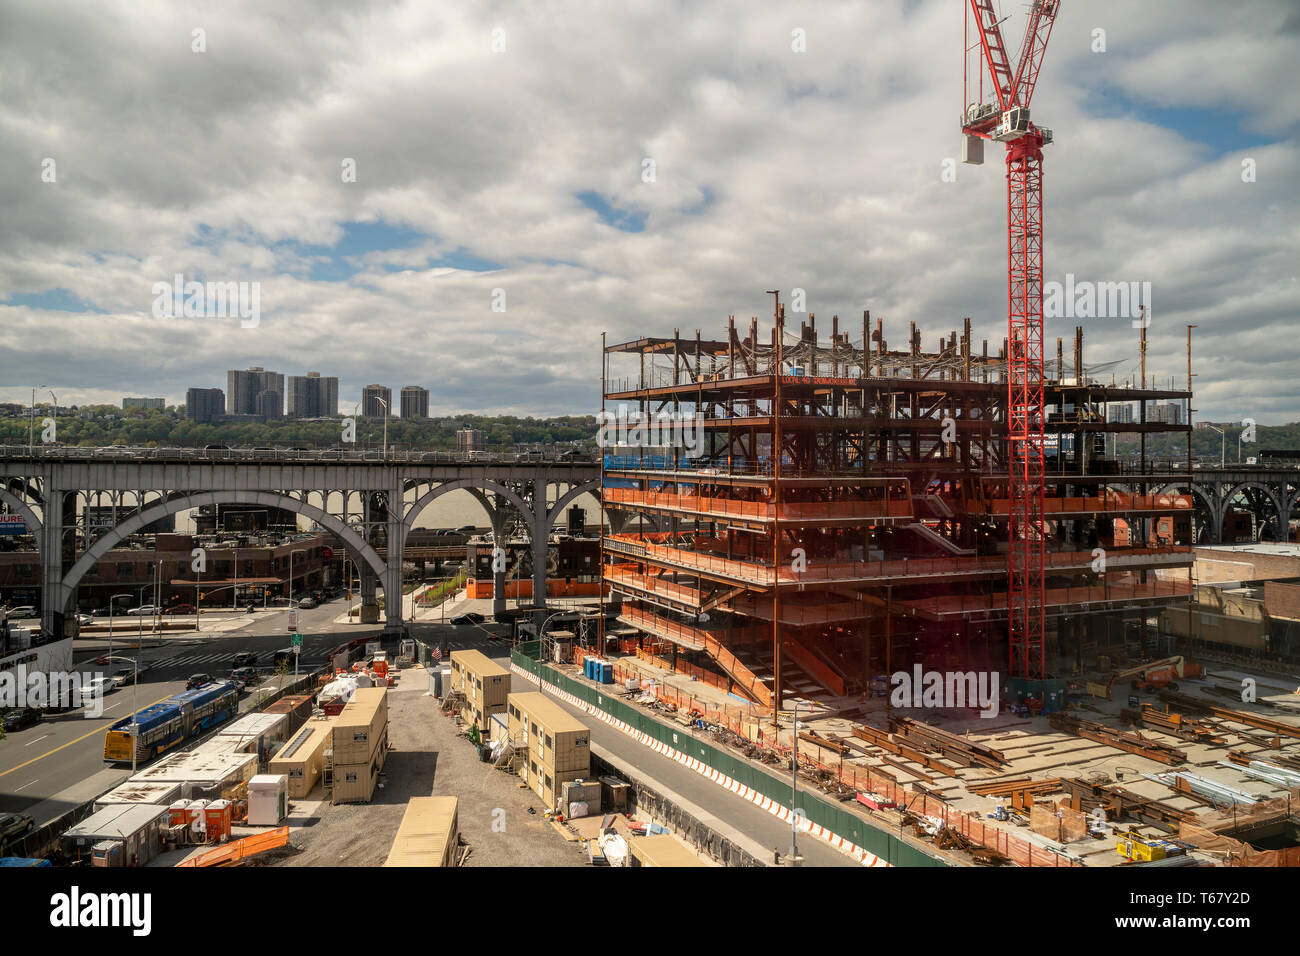 Construction in the 17 acre area, partially acquired through the use of controversial eminent domain, in Manhattan Valley in New York where Columbia University is building a bio-tech lab as well as a general university expansion on Saturday, April 27, 2019. The Riverside Drive viaduct spanning Manhattan Valley is in the background. (Â© Richard B. Levine) Stock Photo